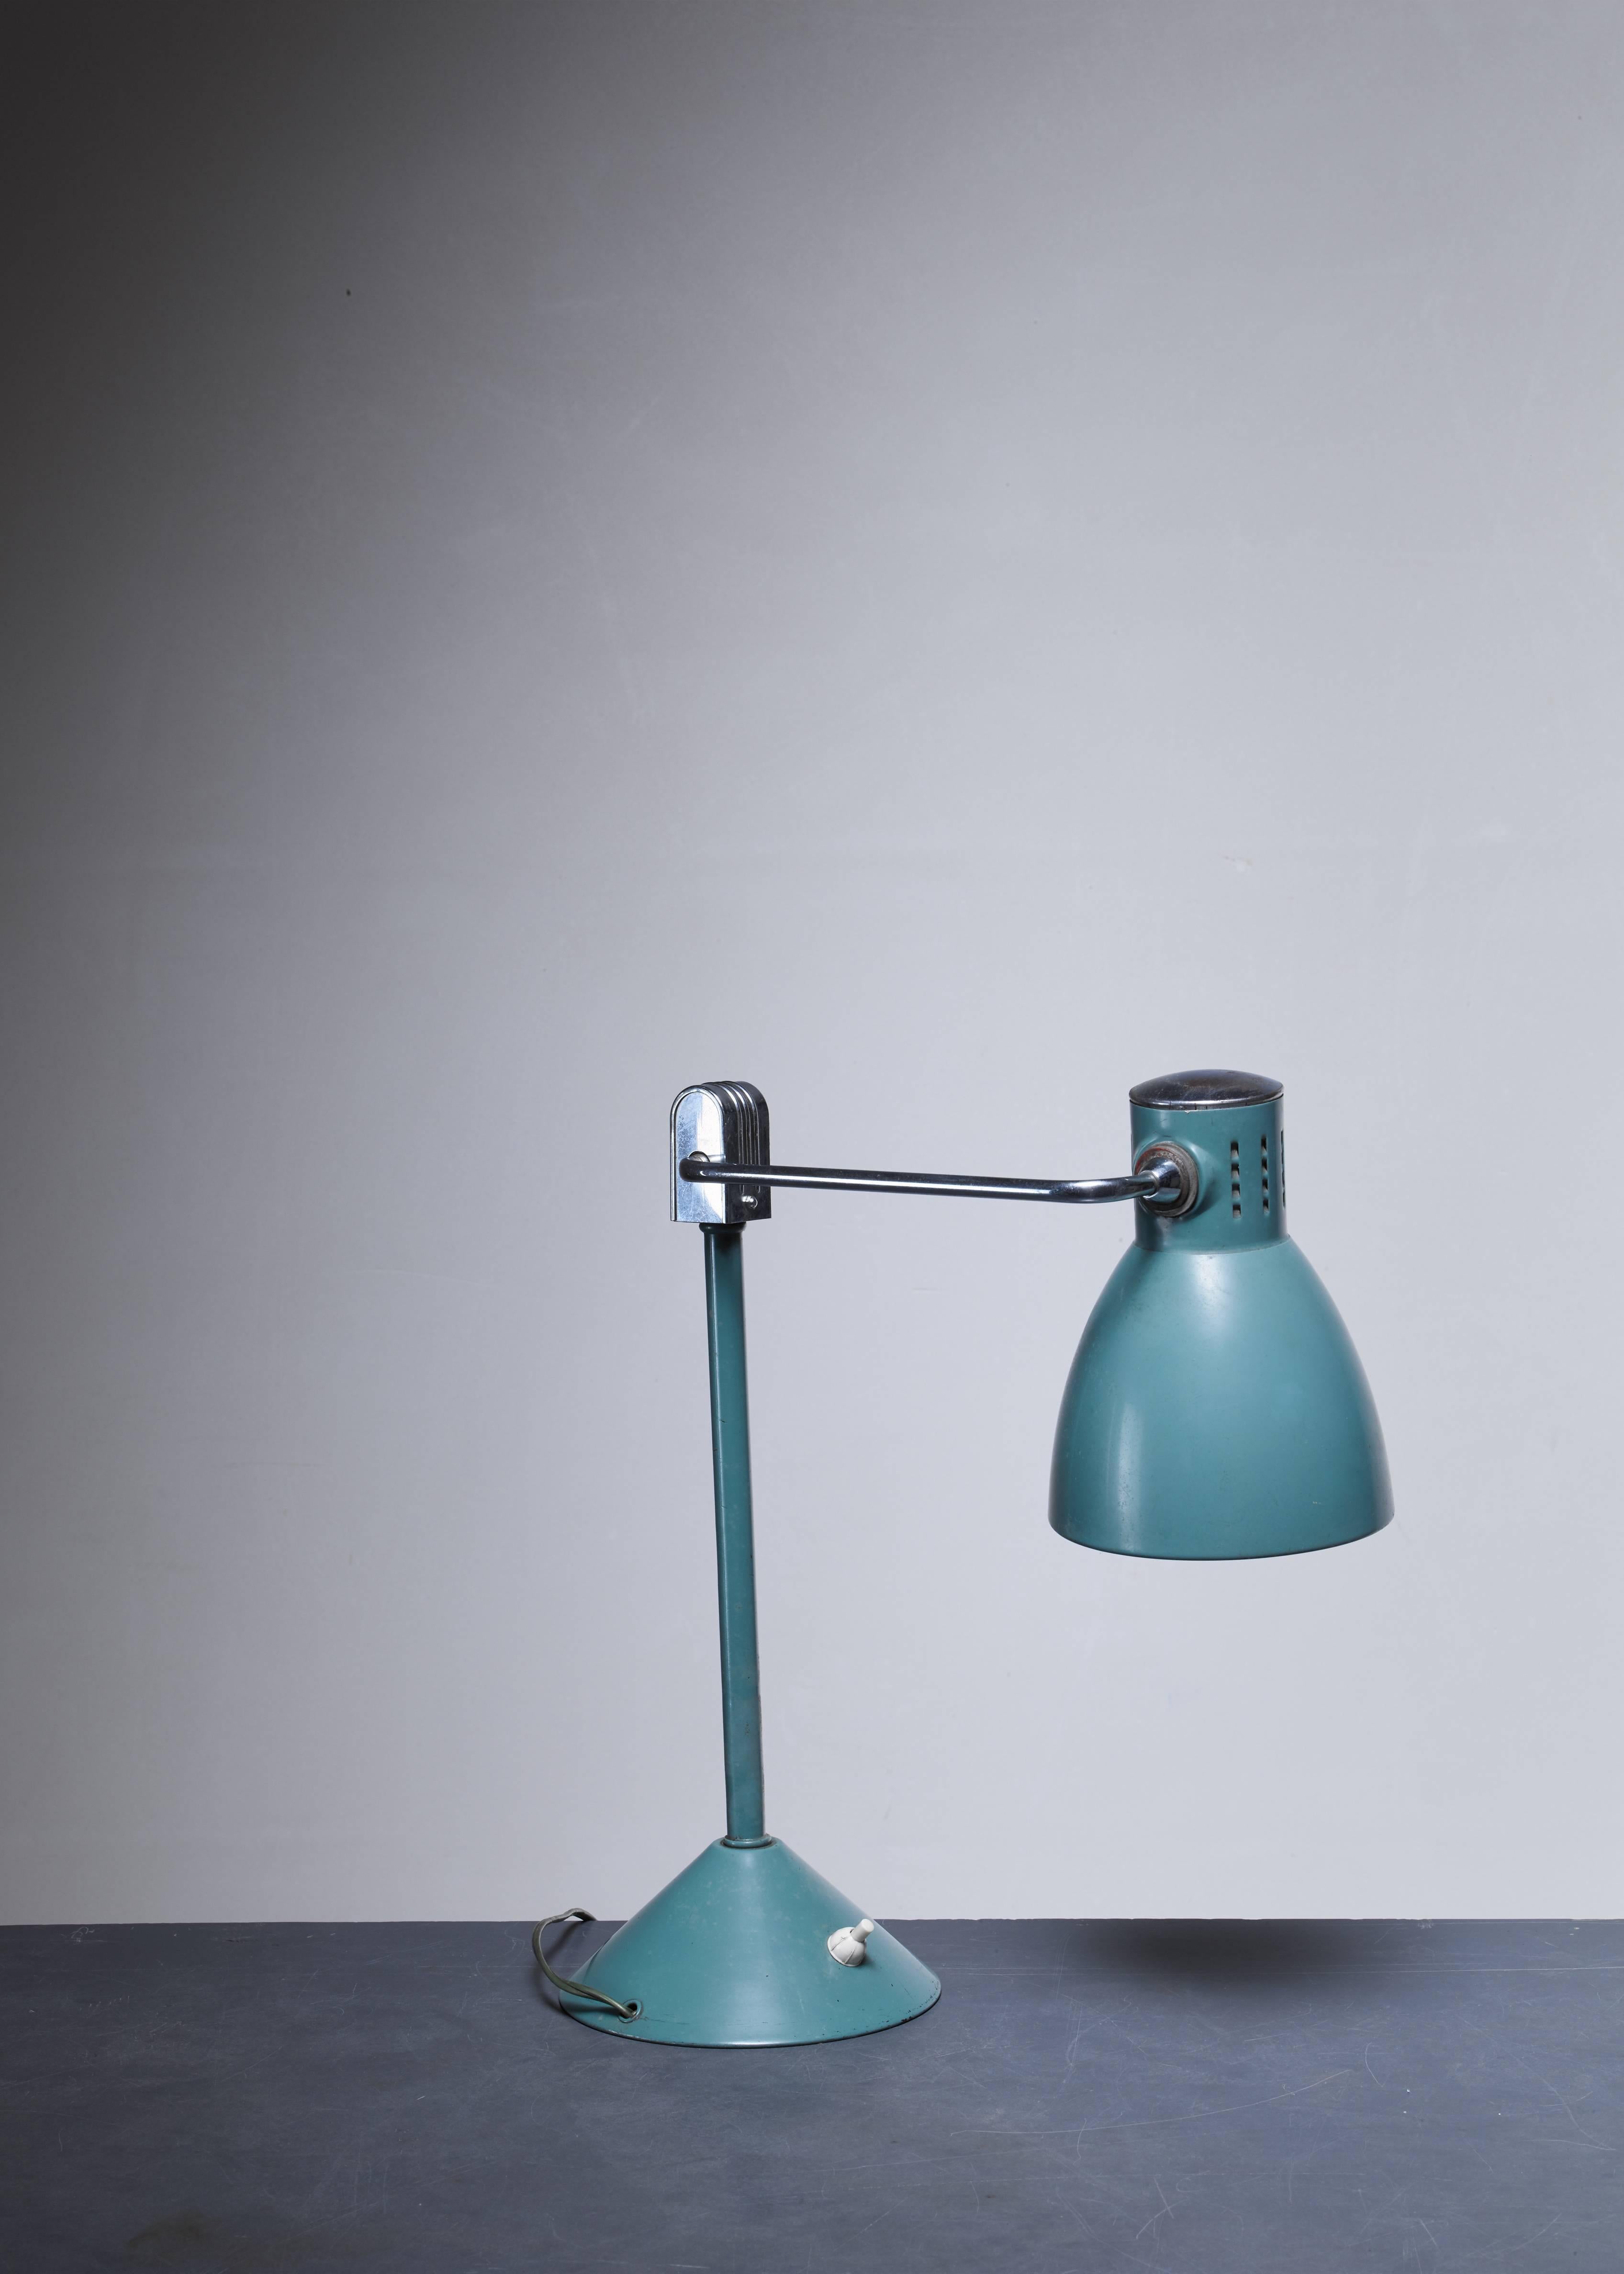 Green Jumo Table Lamp, France, 1940s For Sale 1